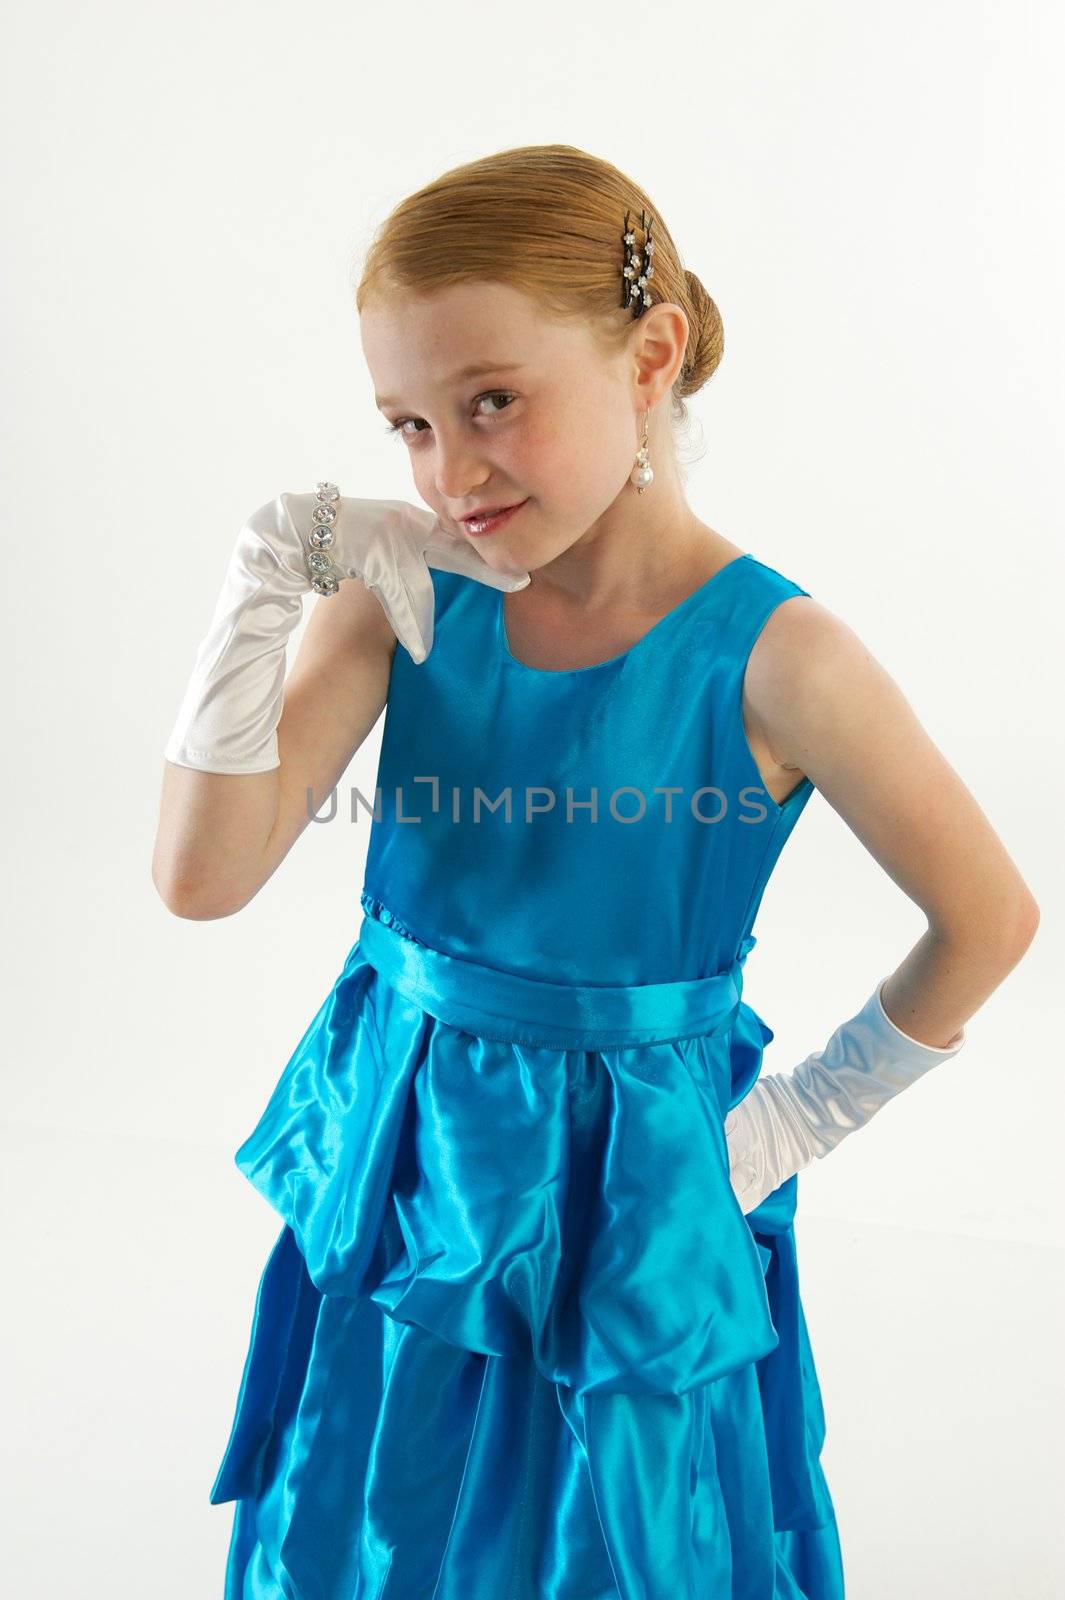 Young Girl in Ball Gown by pixelsnap